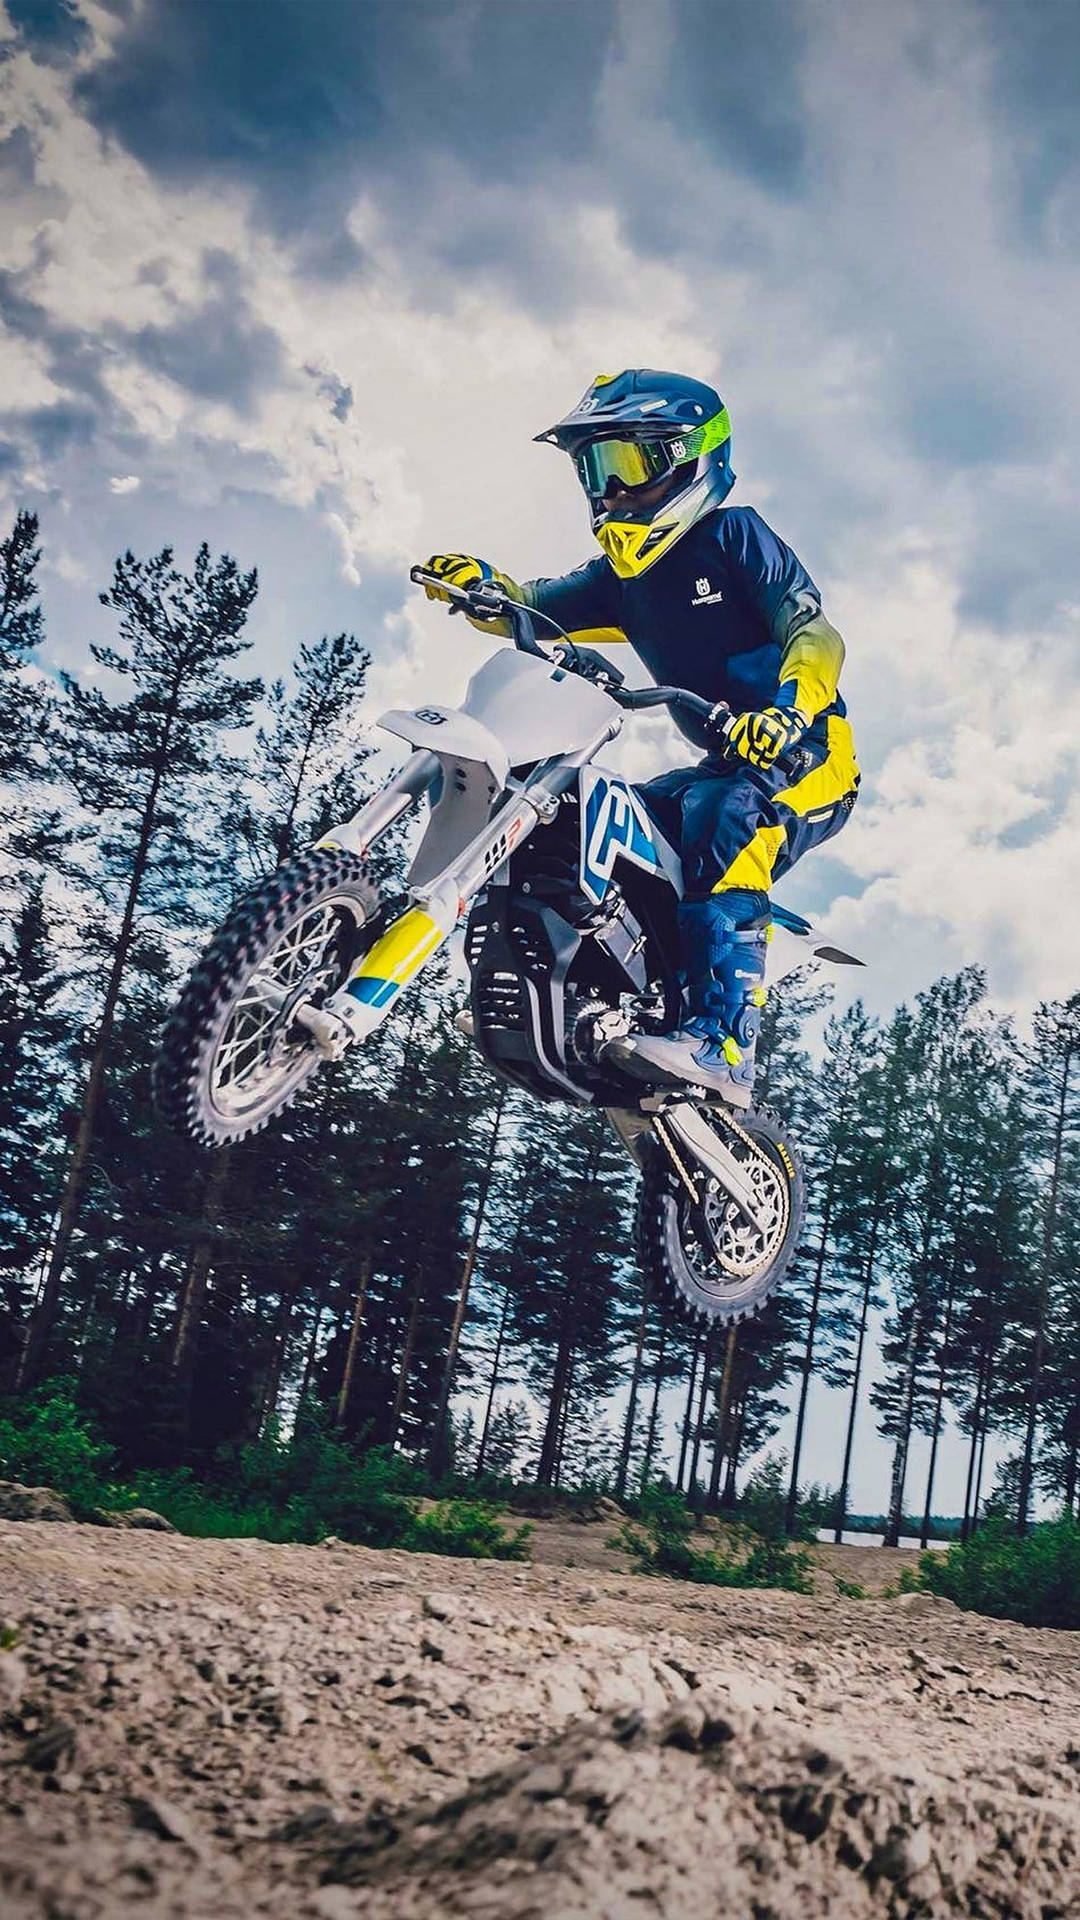 Dirt Bike In Action Background